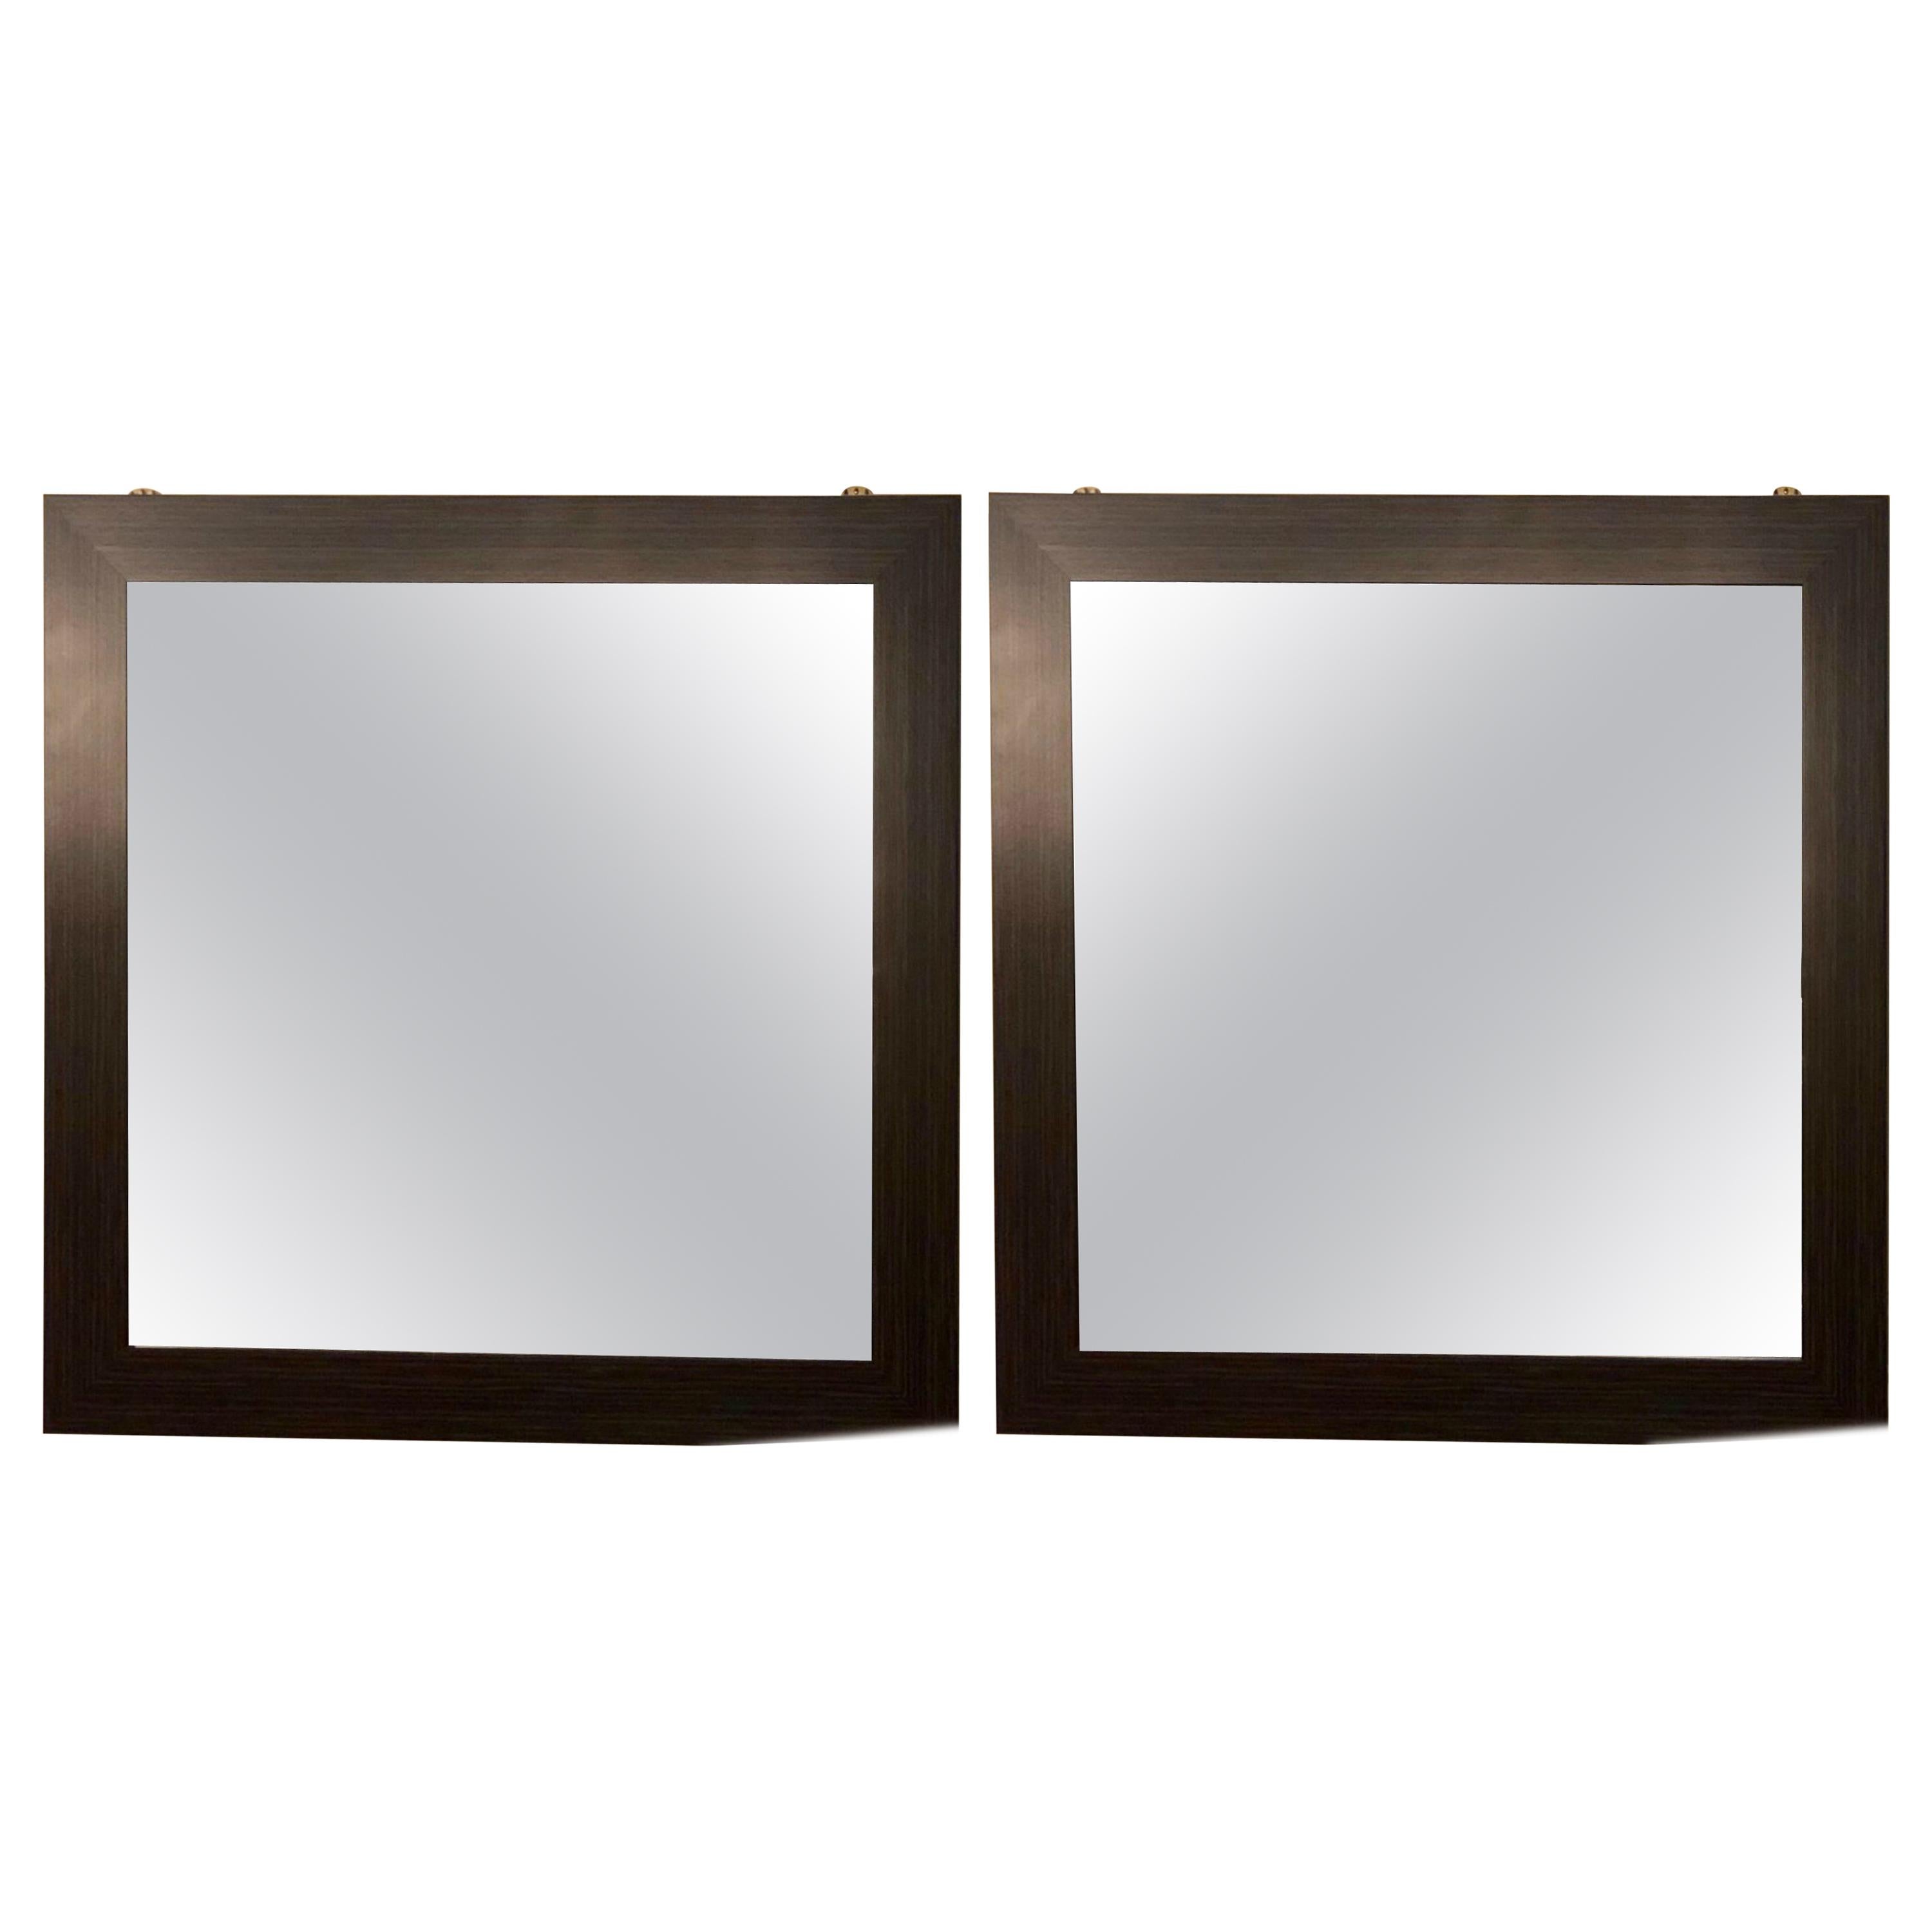 Pair of Art Deco Style Faux Macassar Square Console or Wall Mirrors